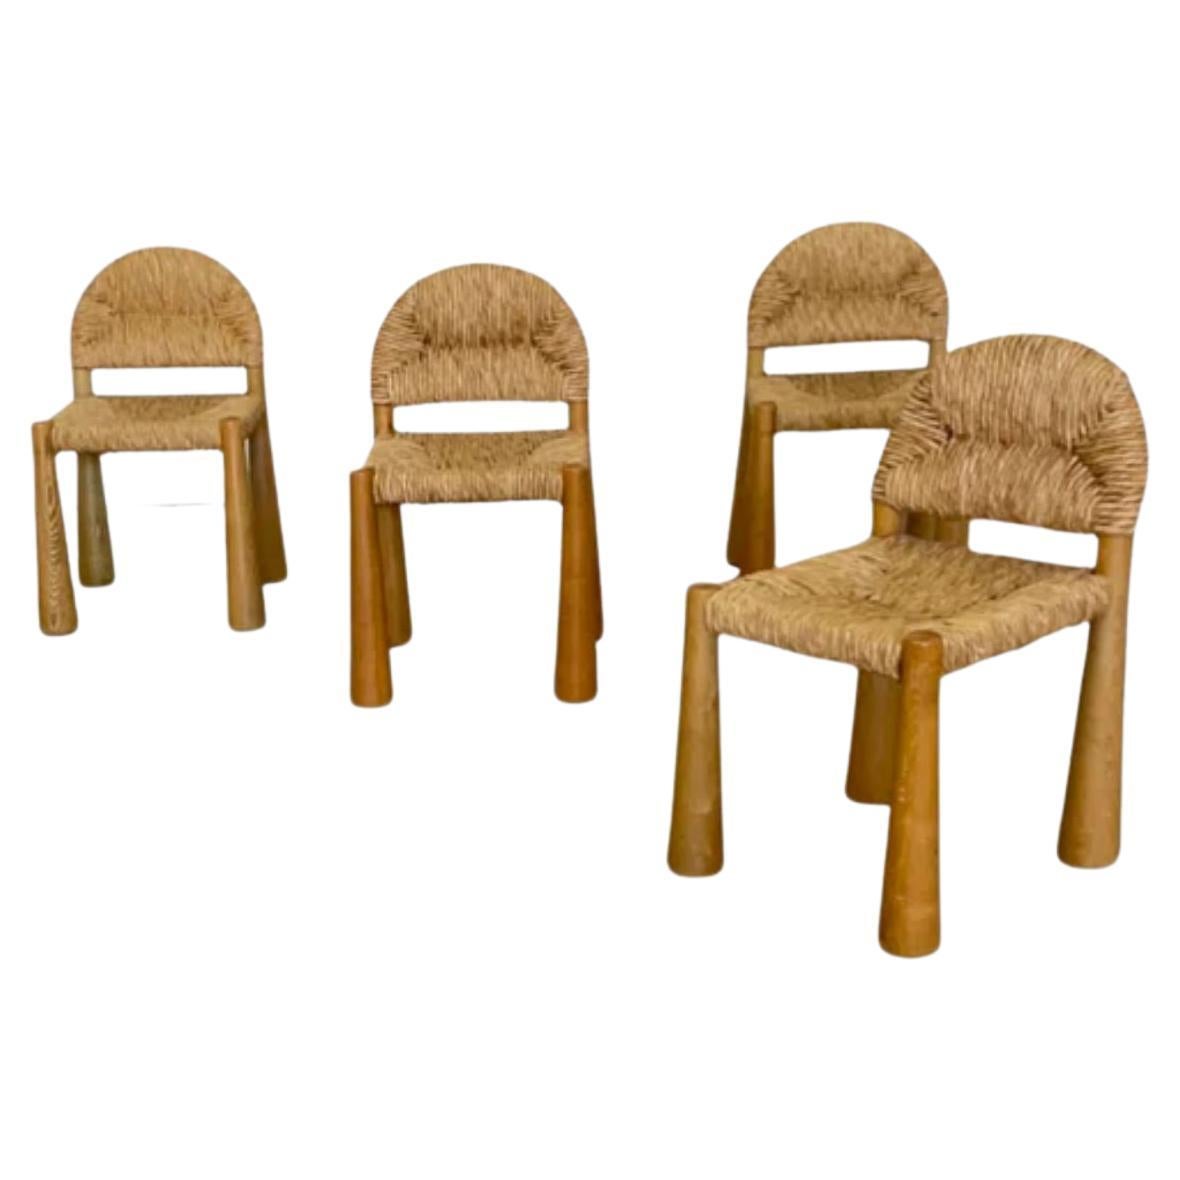 Set of 4 "Toscanolla" Dining Chairs in Solid Pine by Alessandro Becchi, 1970s For Sale